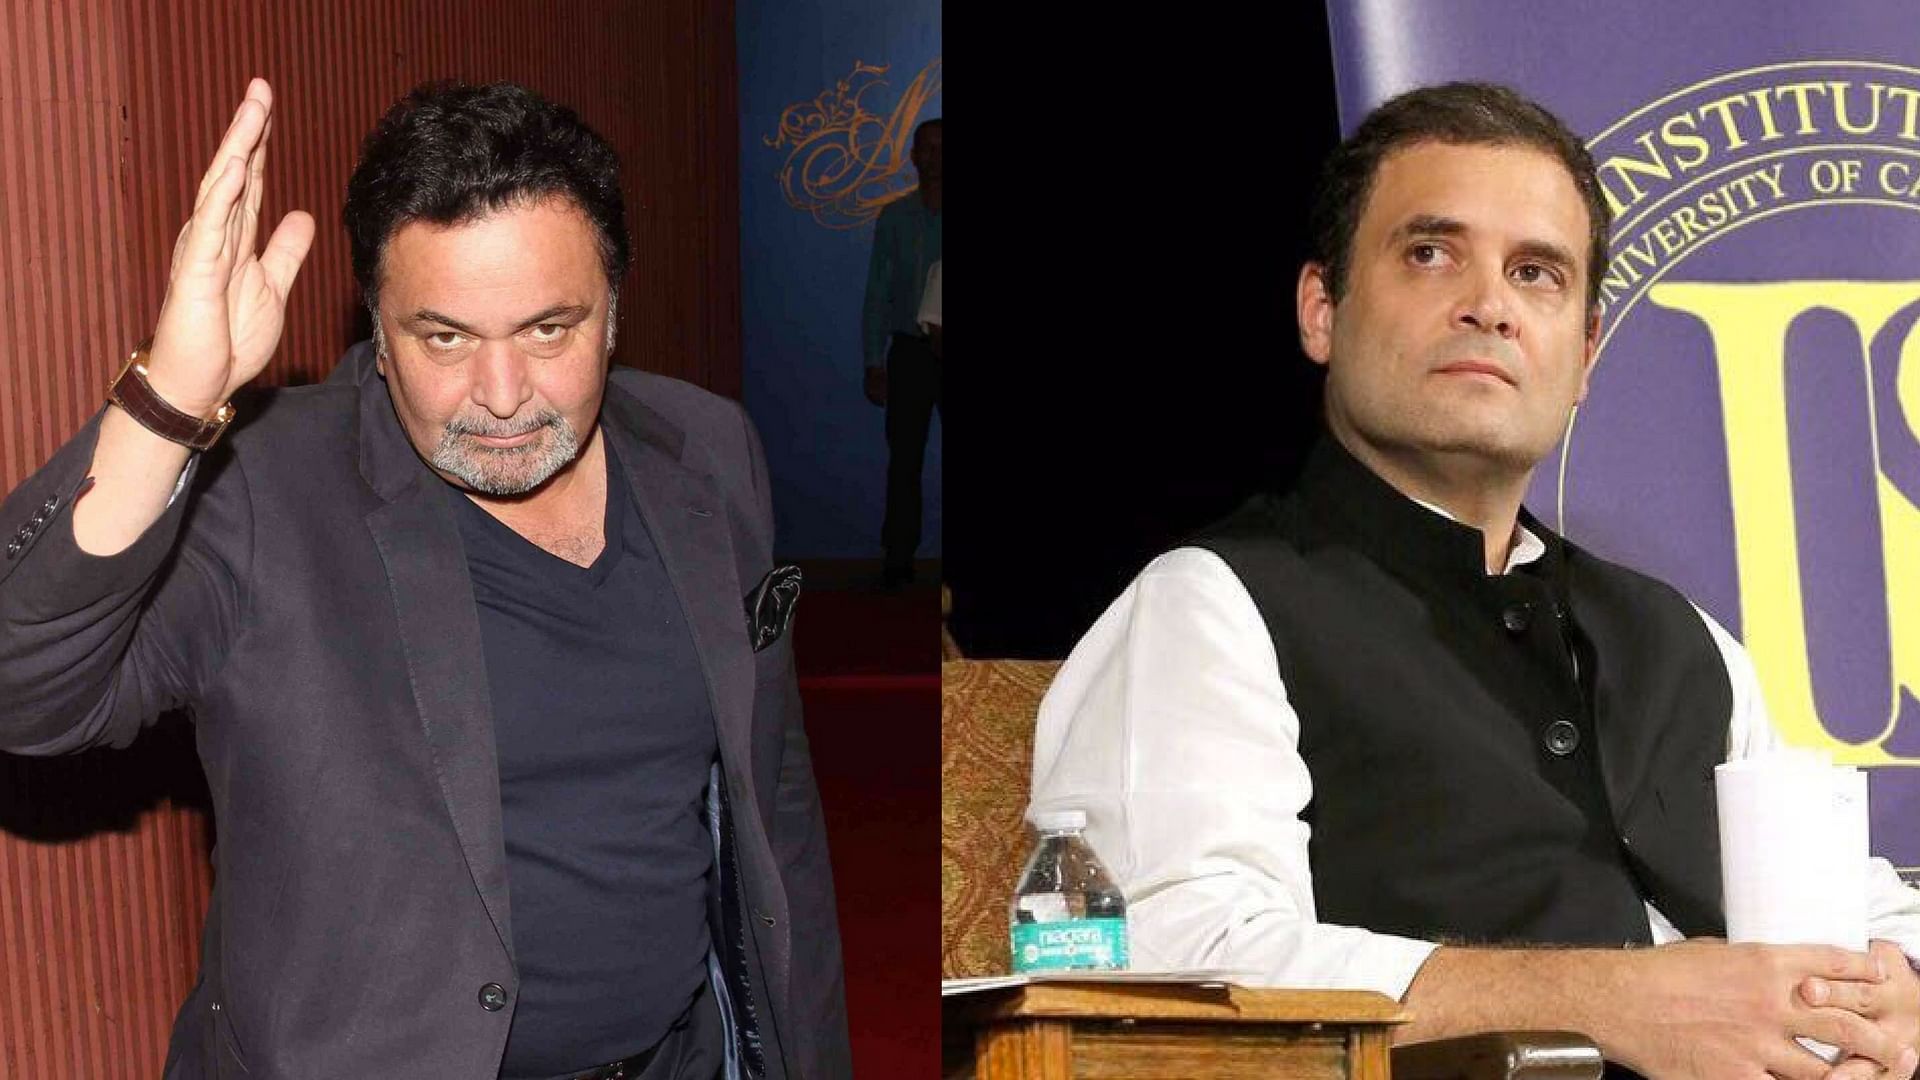 Rishi Kapoor disagrees with Rahul Gandhi’s take on dynastic succession.